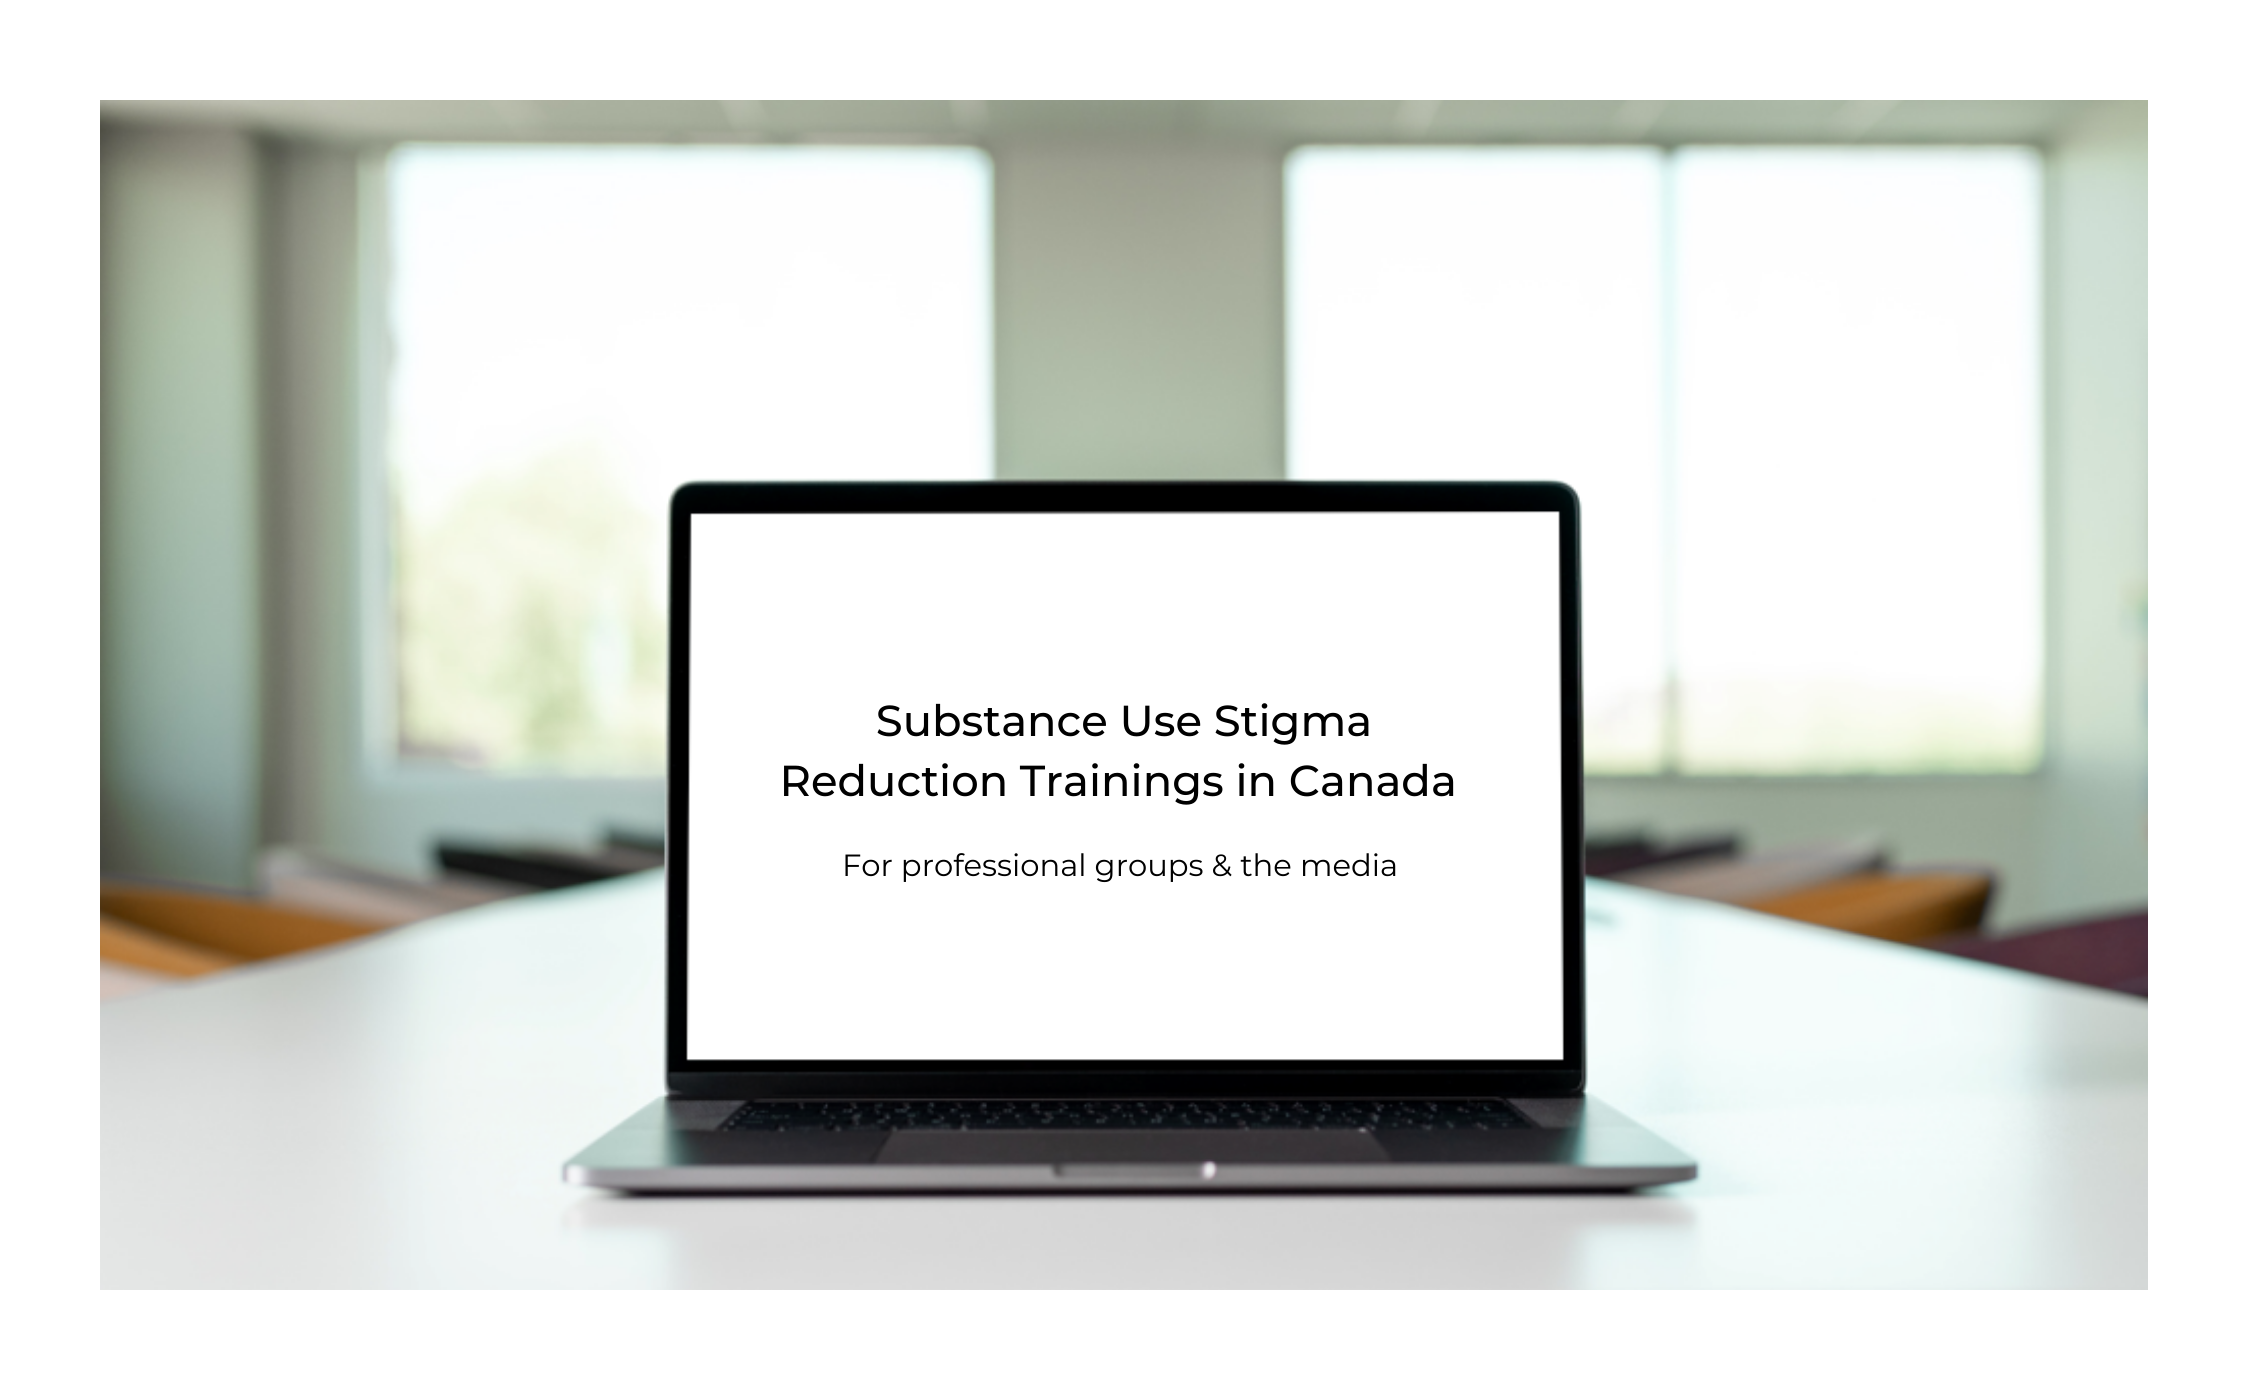 Open computer on a boardroom table. On the computer screen is written "Substance Use Stigma Reduction Trainings in Canada" in black text on a white background.